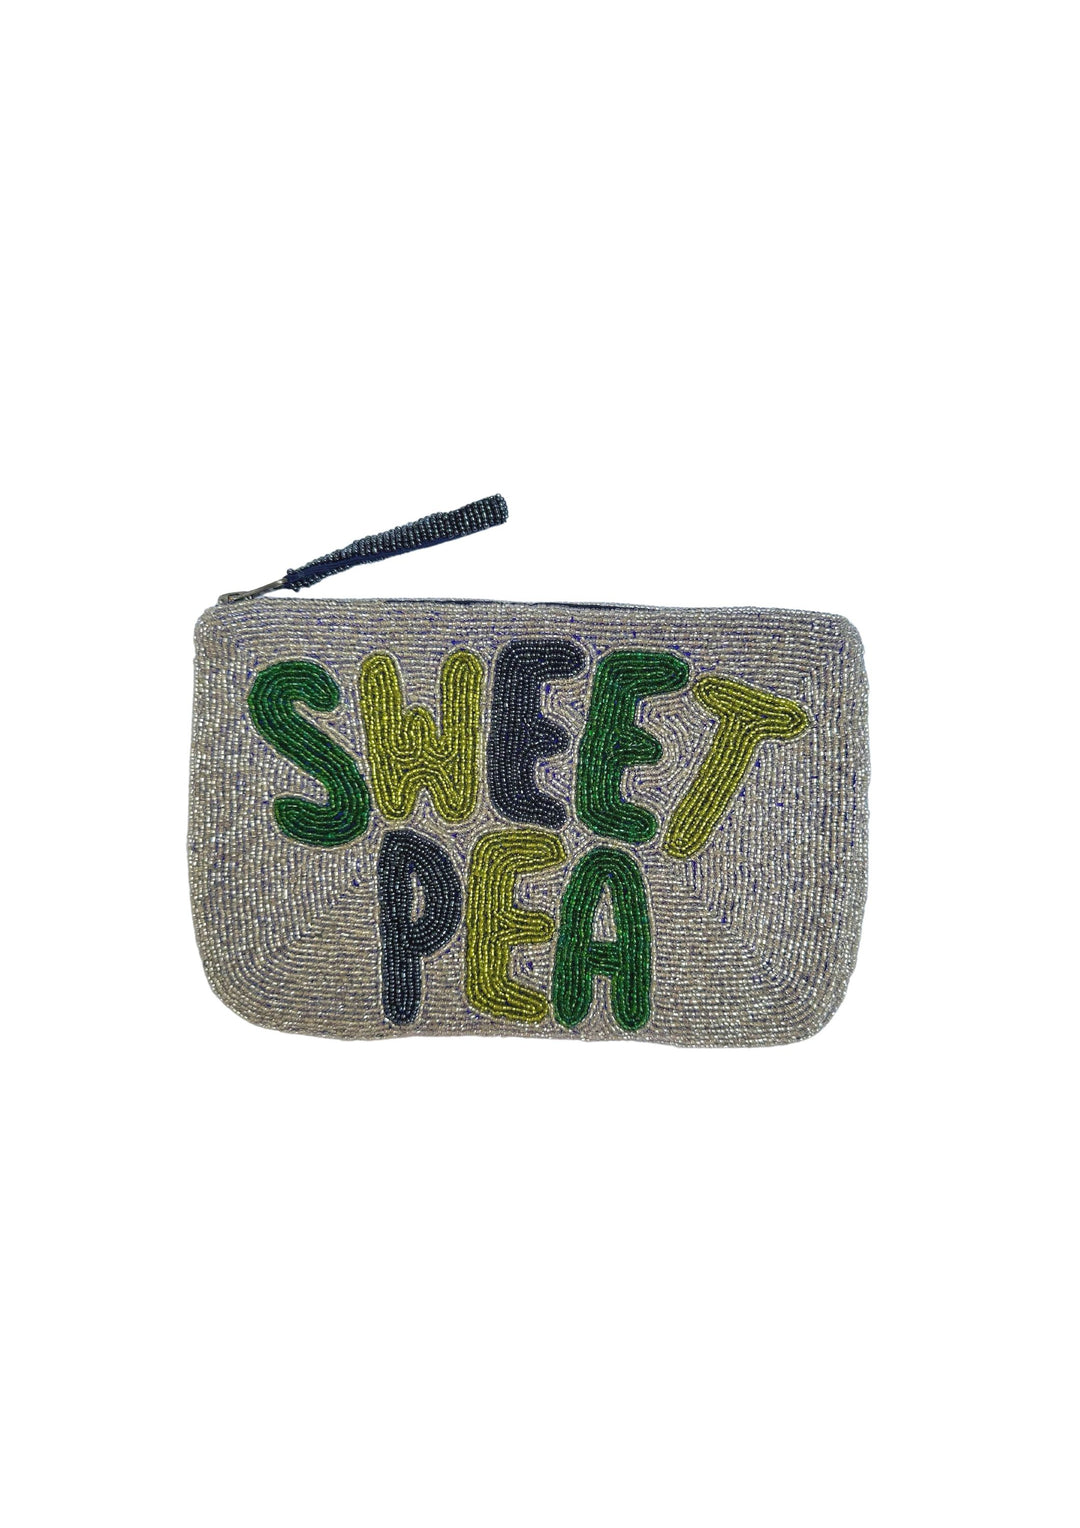 The Jacksons | Sweet Pea in Silver & Green Handmade Beaded Clutch